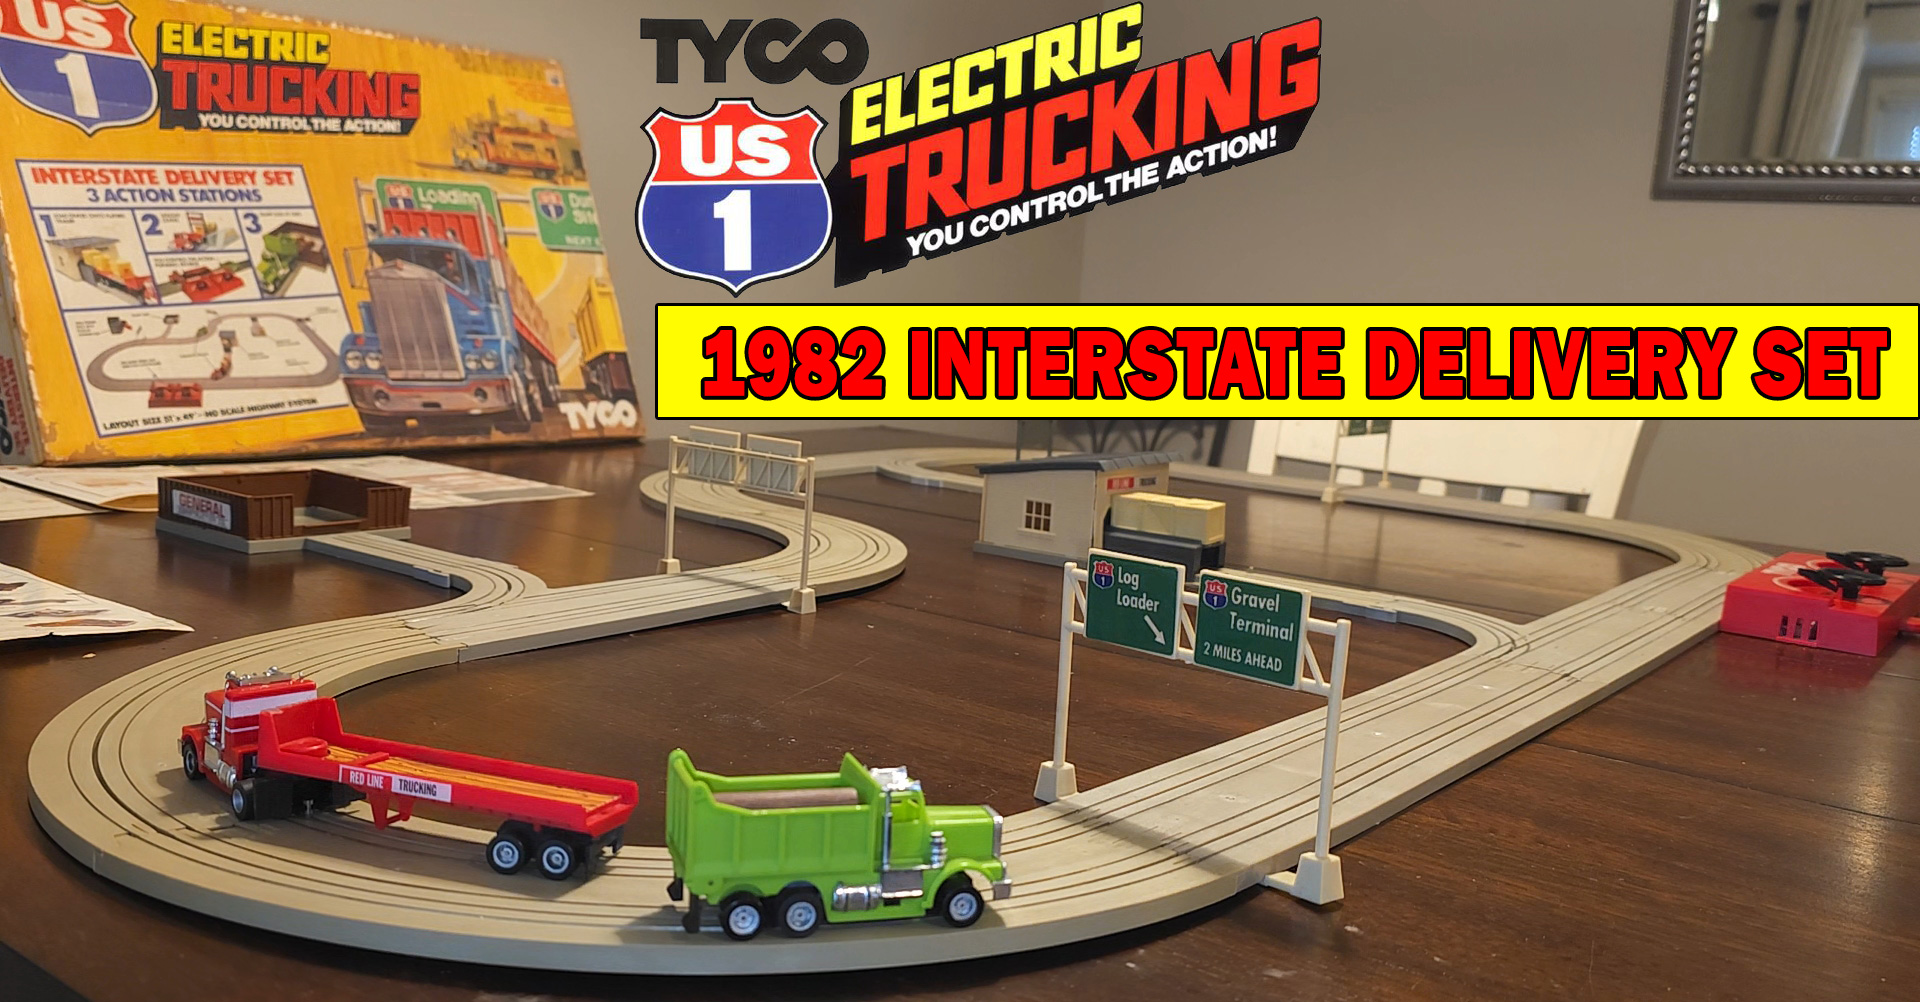 Tyco US1 Trucking Interstate Delivery Set 3206